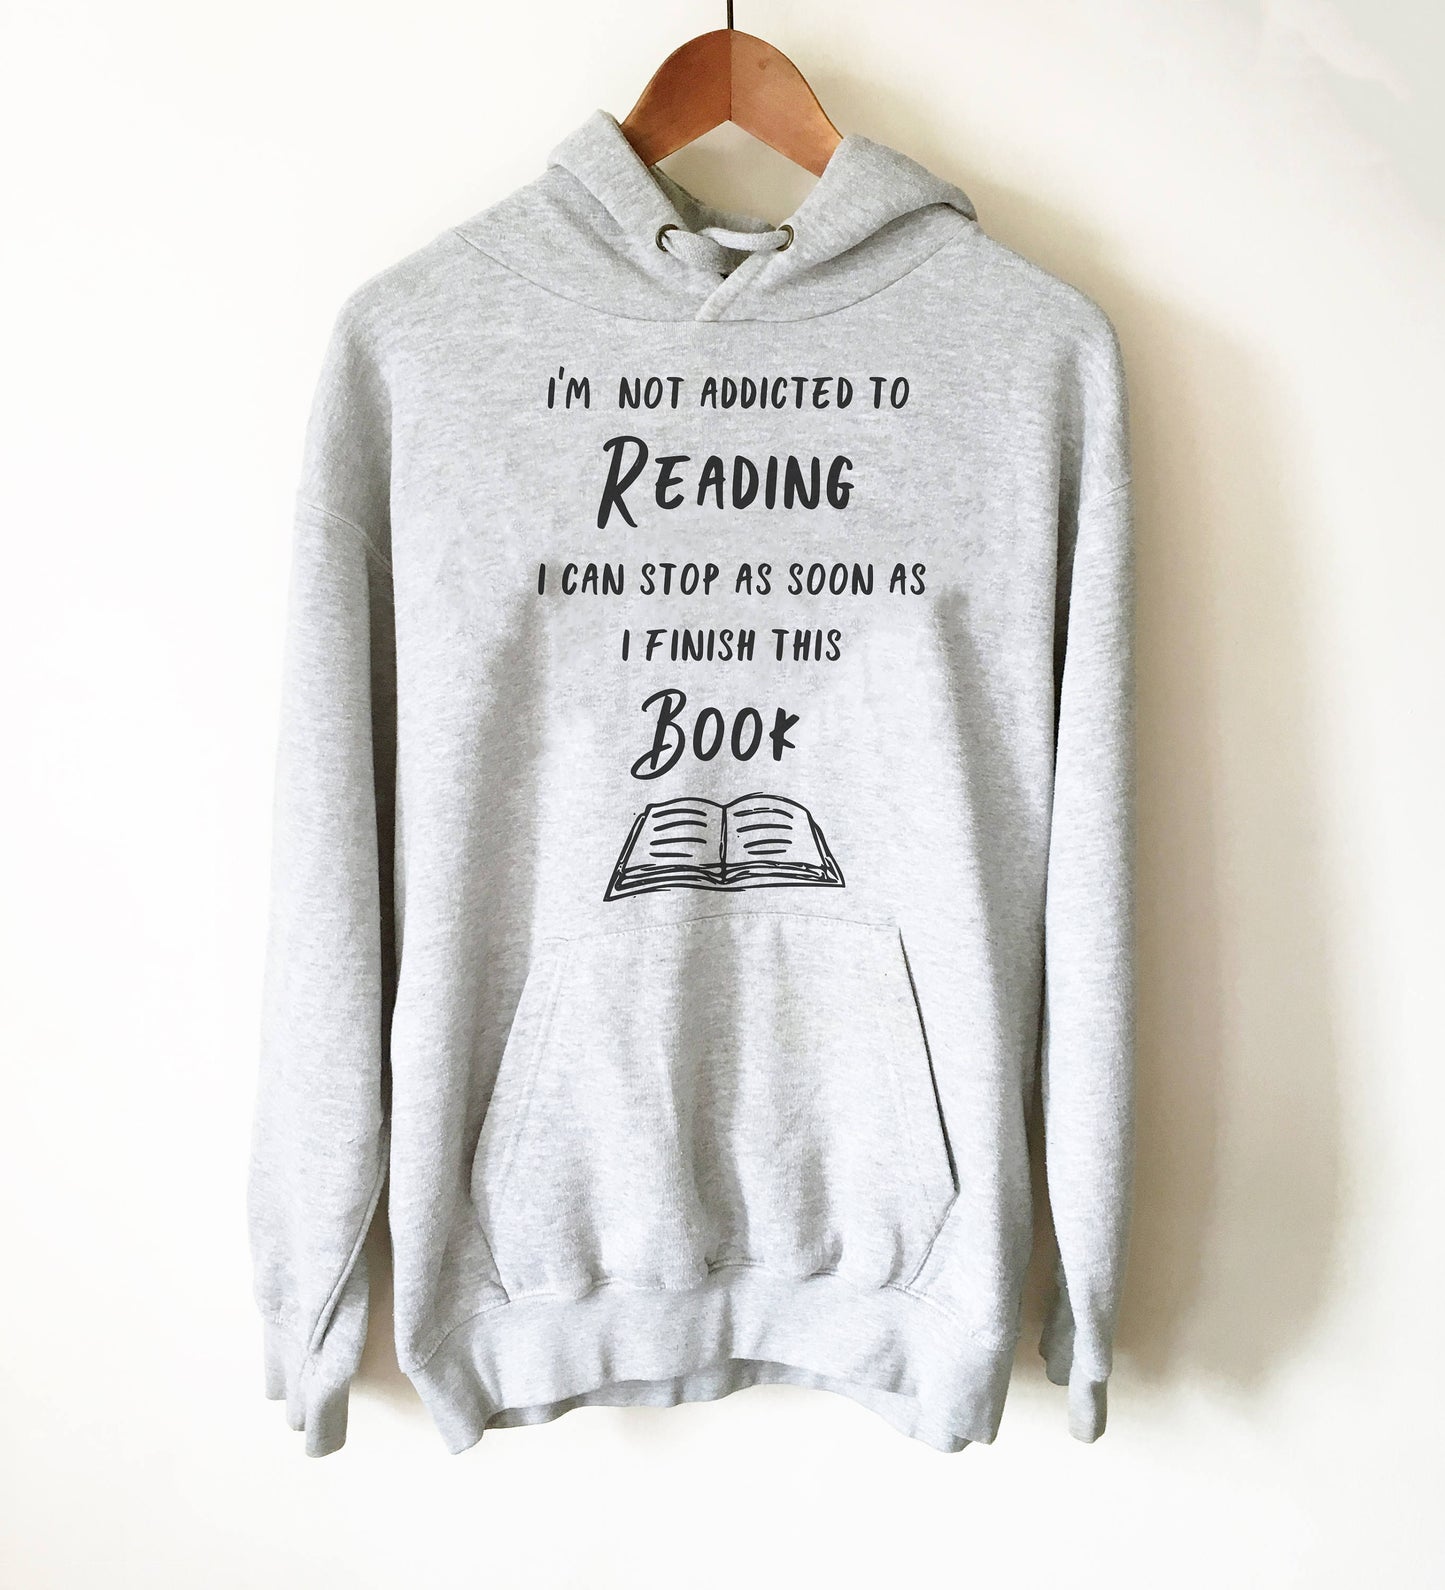 I'm Not Addicted To Reading Hoodie - Book lover hoodie, Book lover gift, Reading Shirt, Book lover gifts, Bookworm gift, Bibliophile